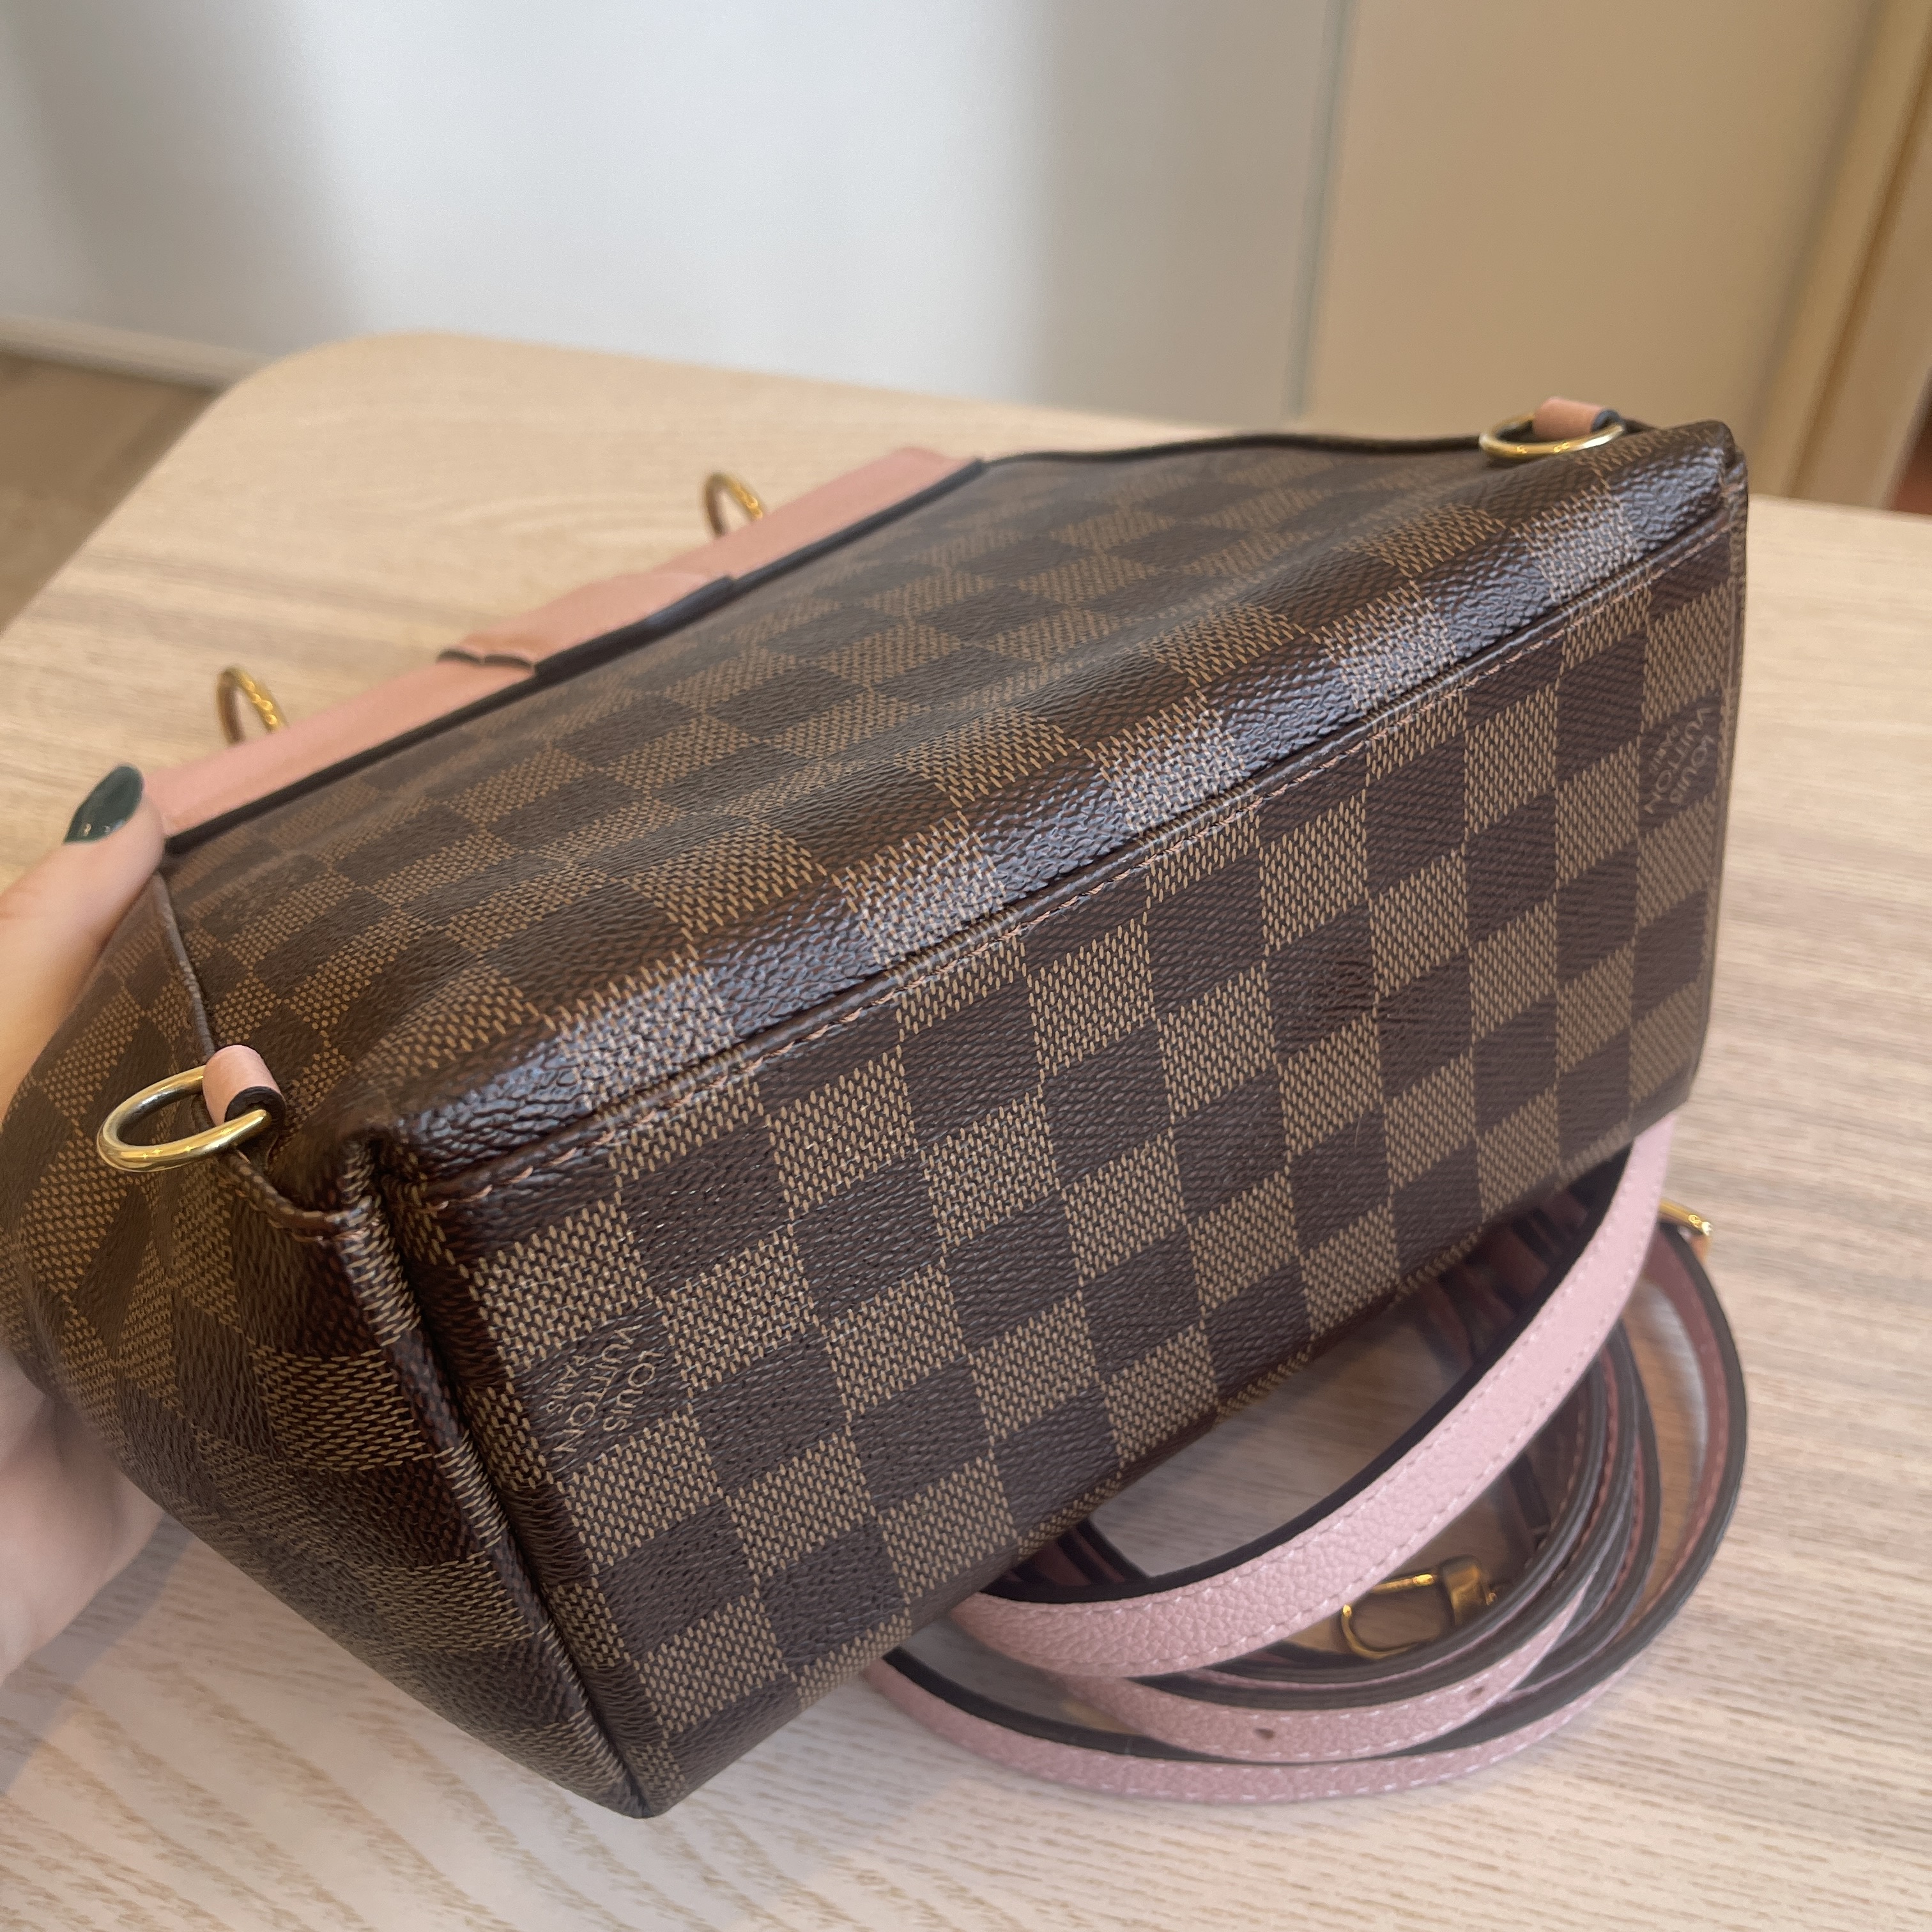 D' Borse - LV Damier Ebene Clapton Backpack In Magnolia Condition :  Preloved (Excellent) Contact us at 0164553444 Location : 25 Lorong  Bangkok,Pulau Tikus,10250 Georgetown Pg PM us on Facebook Follow us